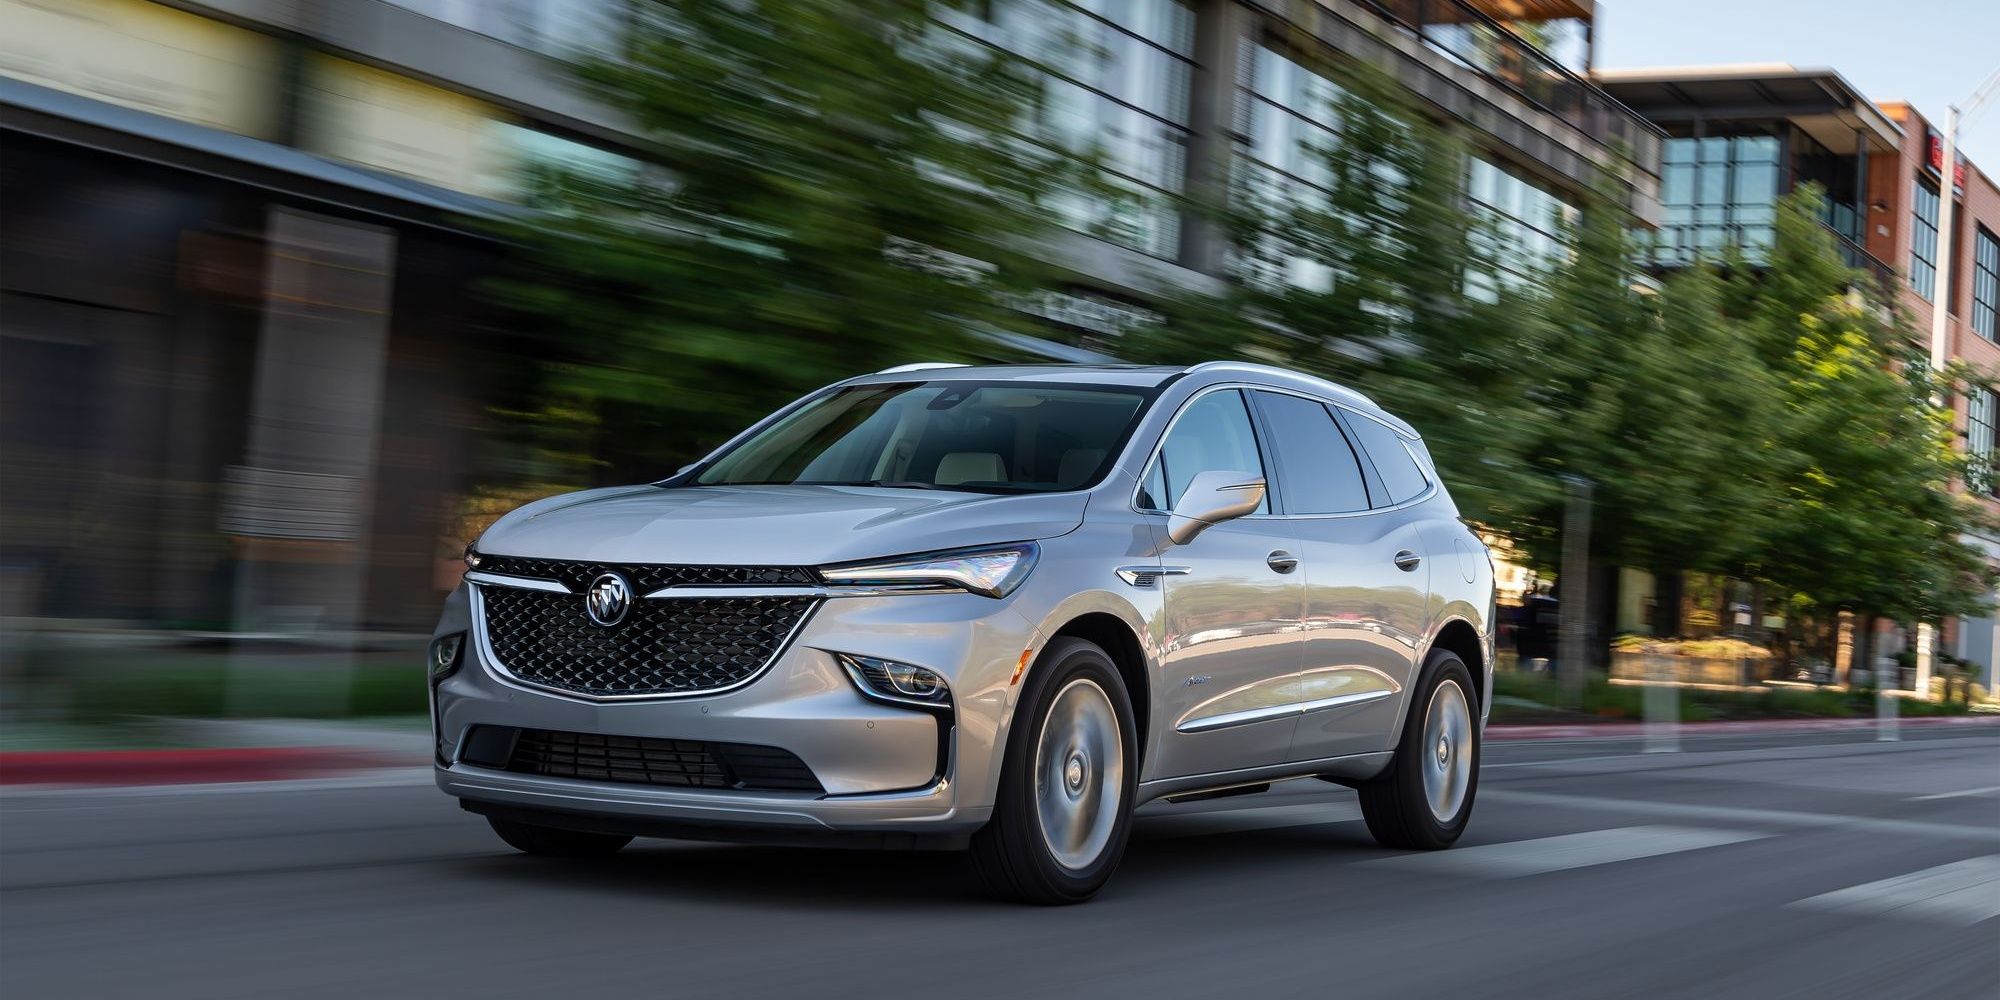 Buick Enclave Vs Acura MDX How The Two Premium SUVs Stack Up Against